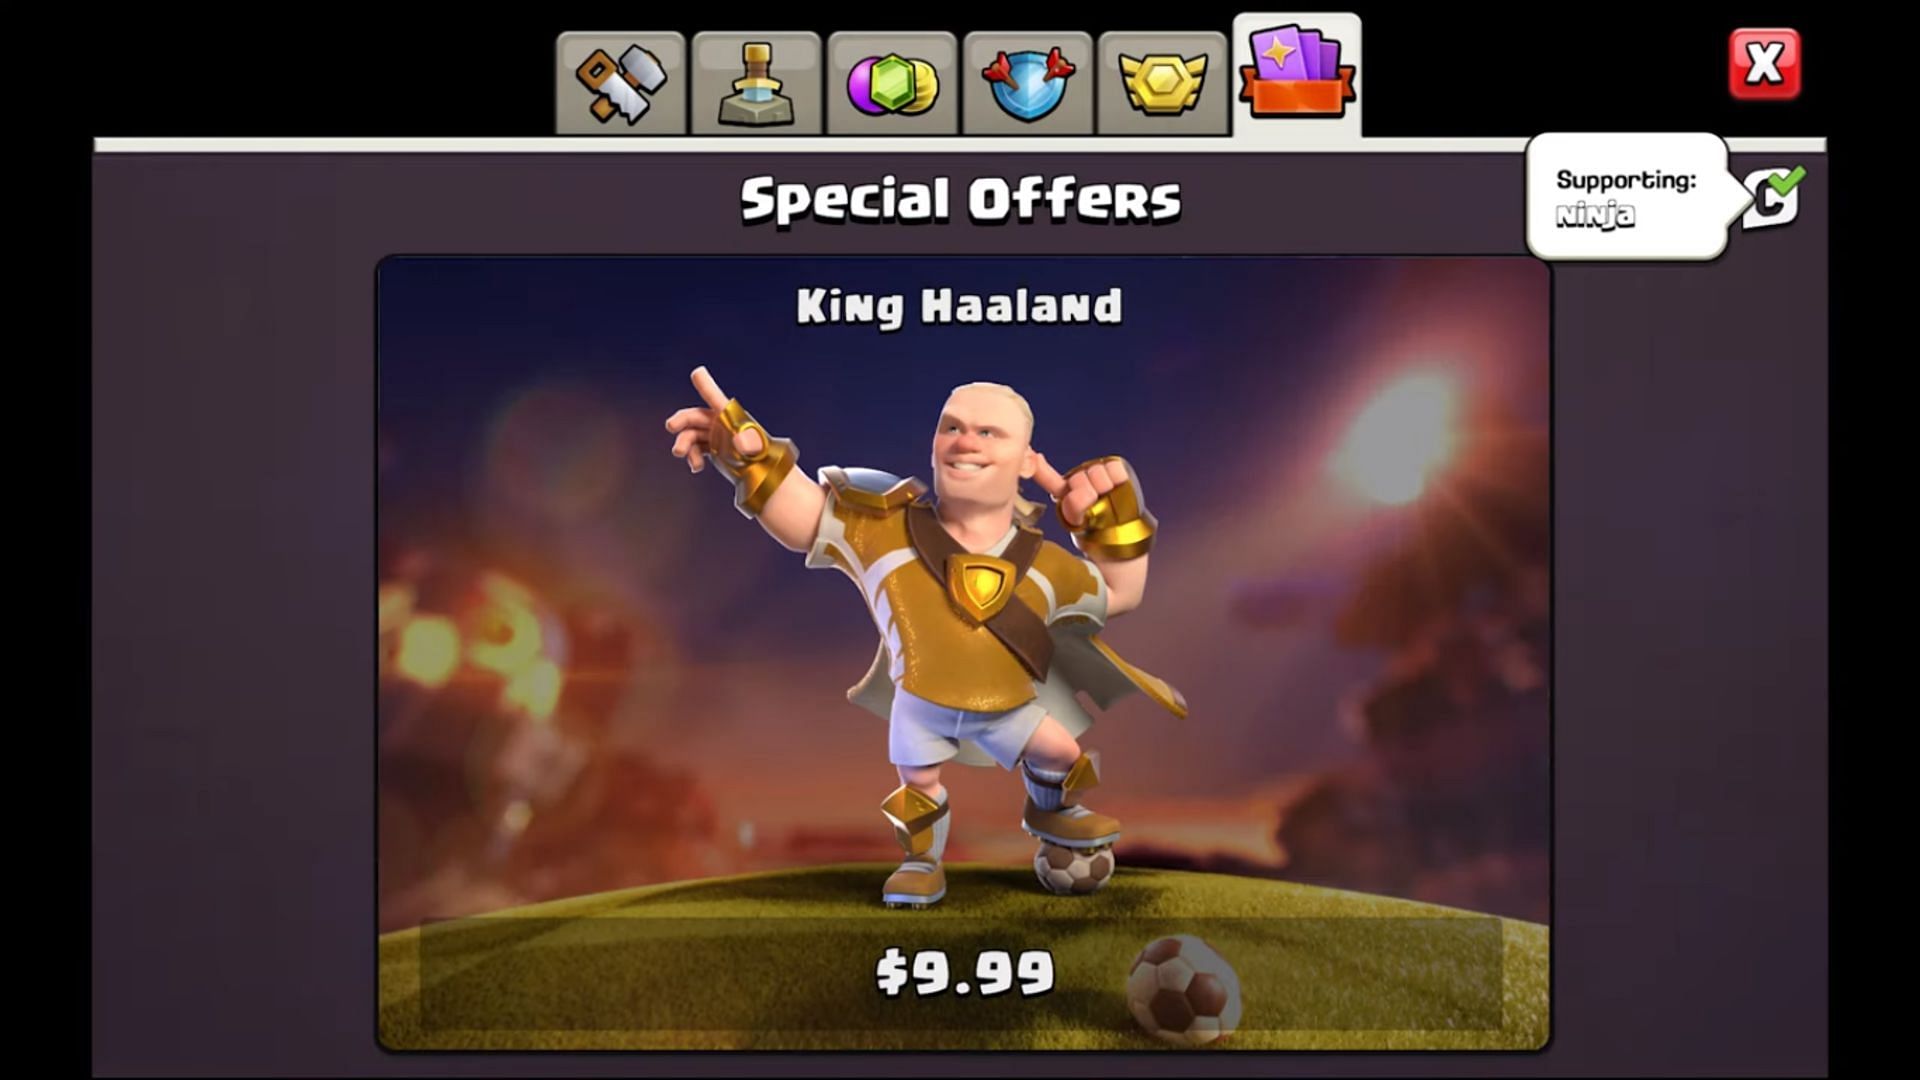 Required cost (Image via Supercell)